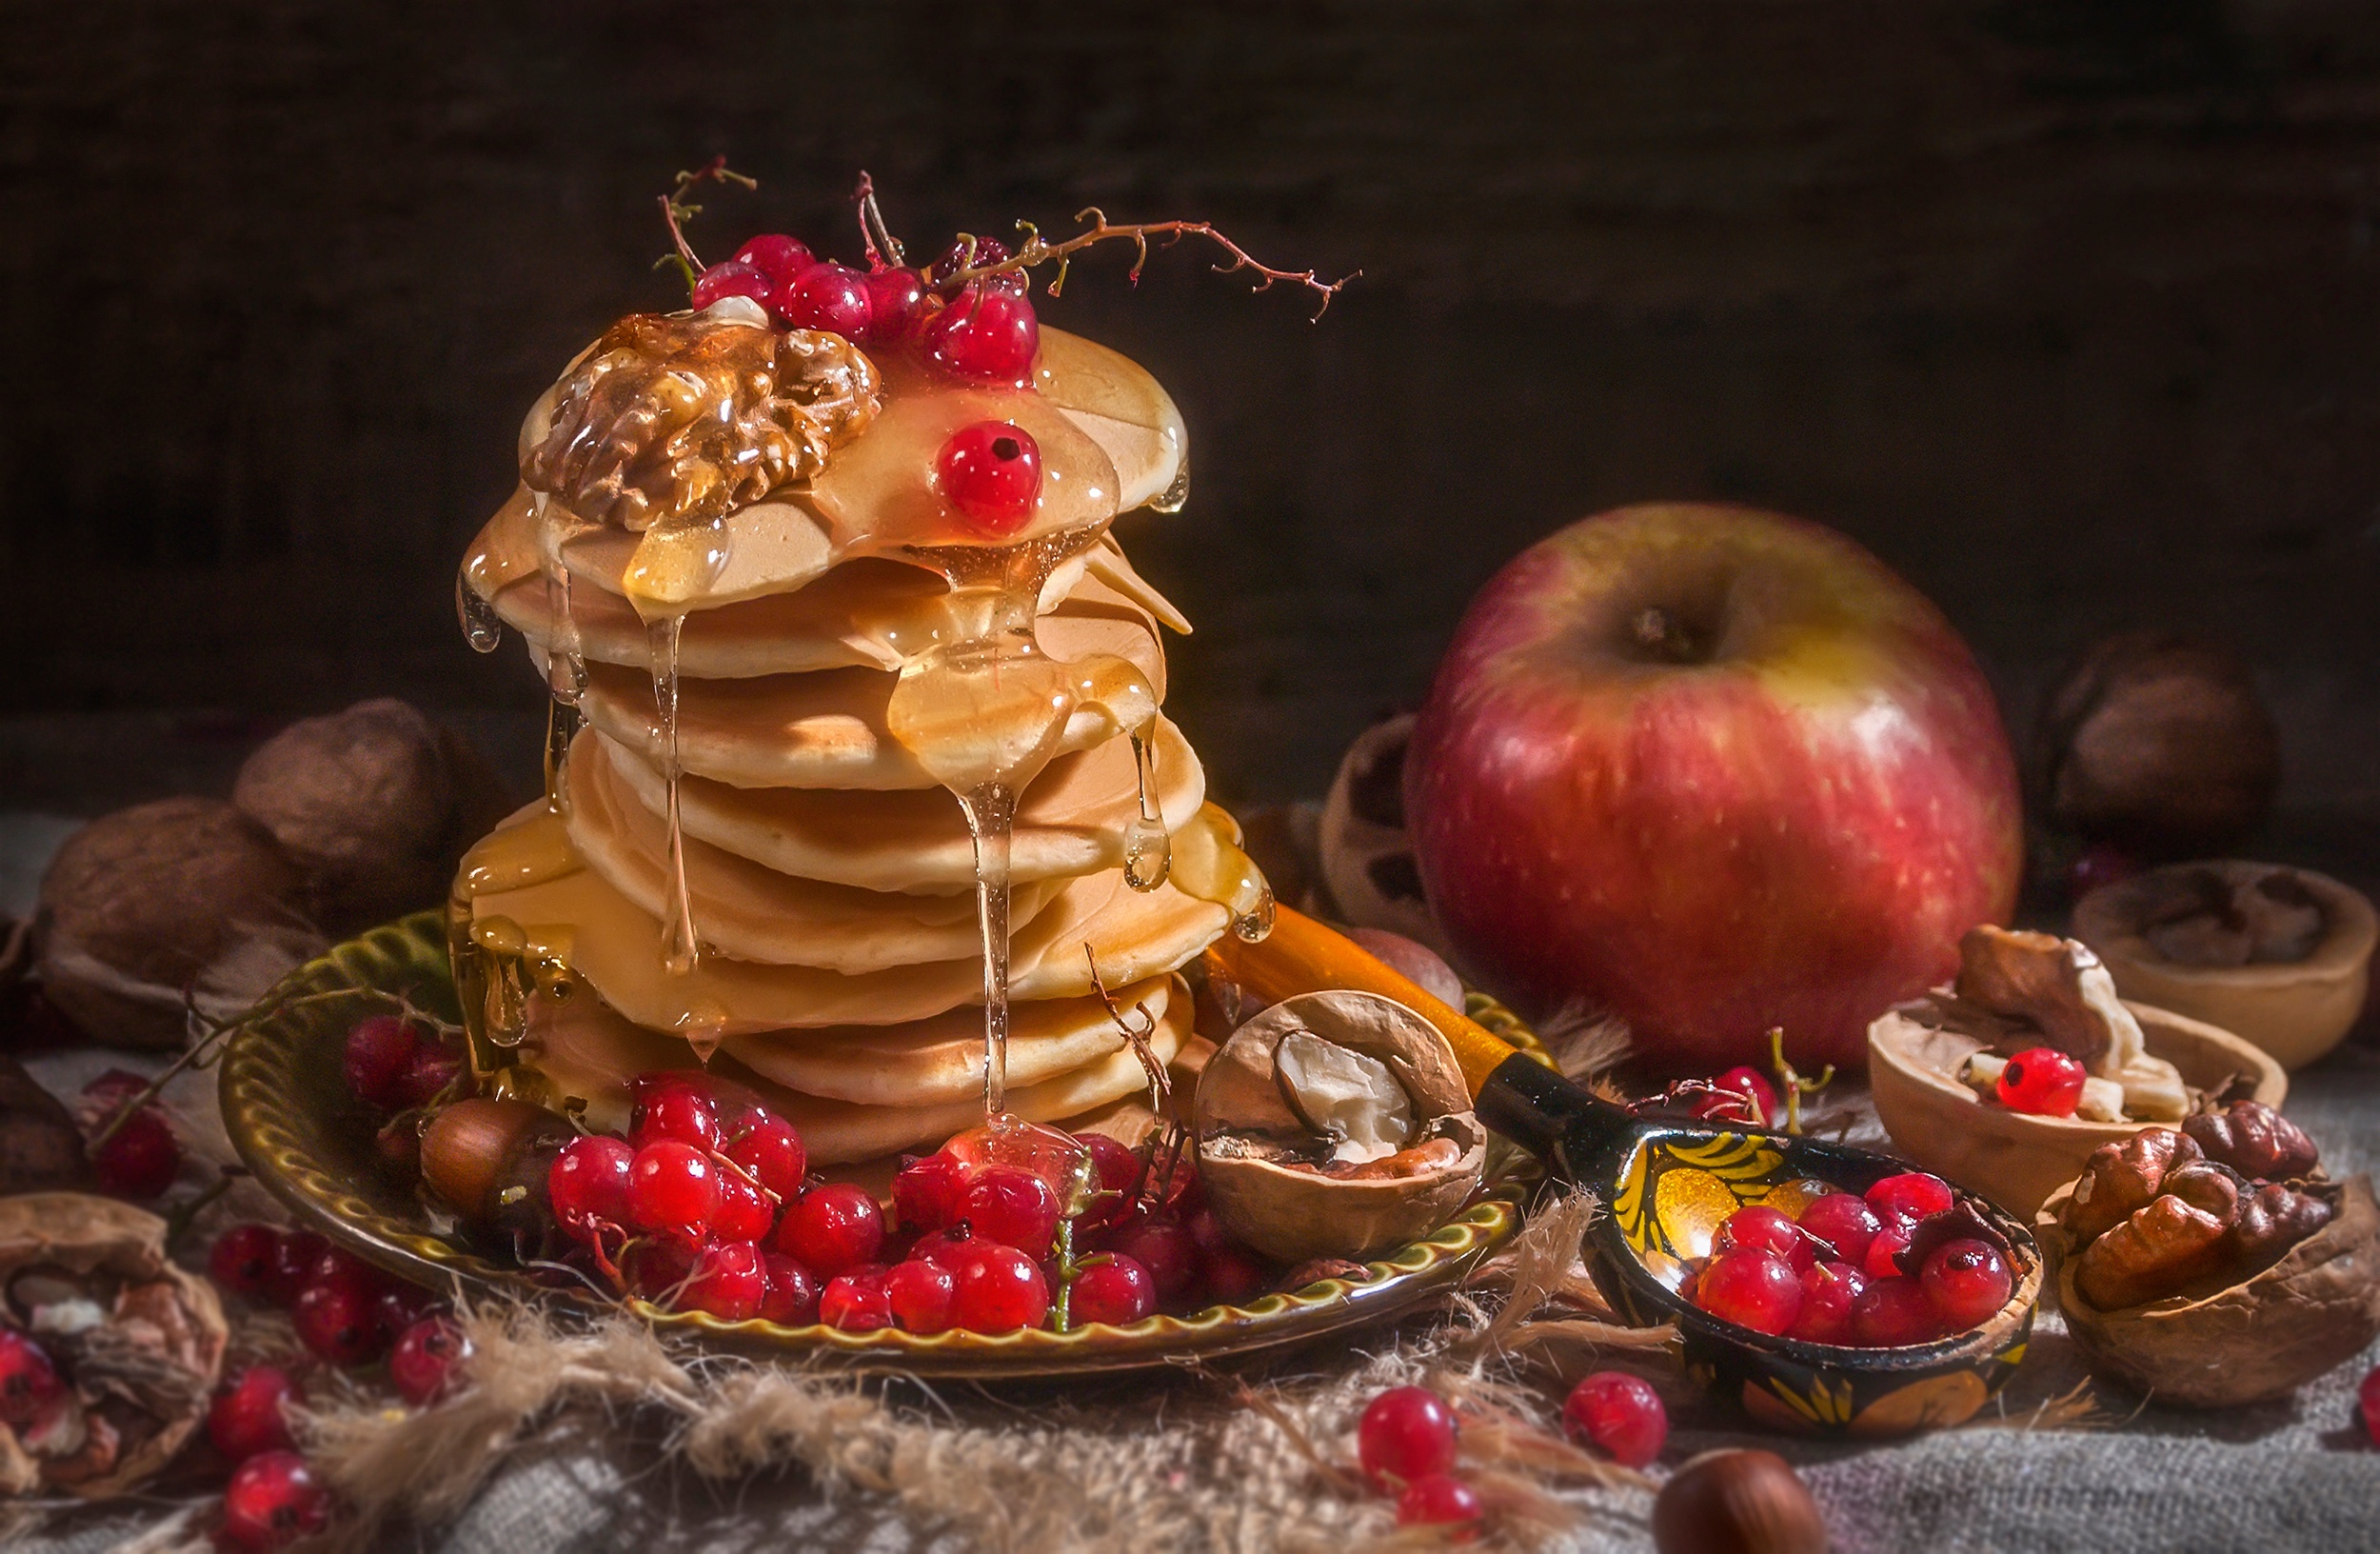 Food Sweets Pancakes Honey Apples Fruit Berries Red Currant Walnuts Syrup 2500x1632